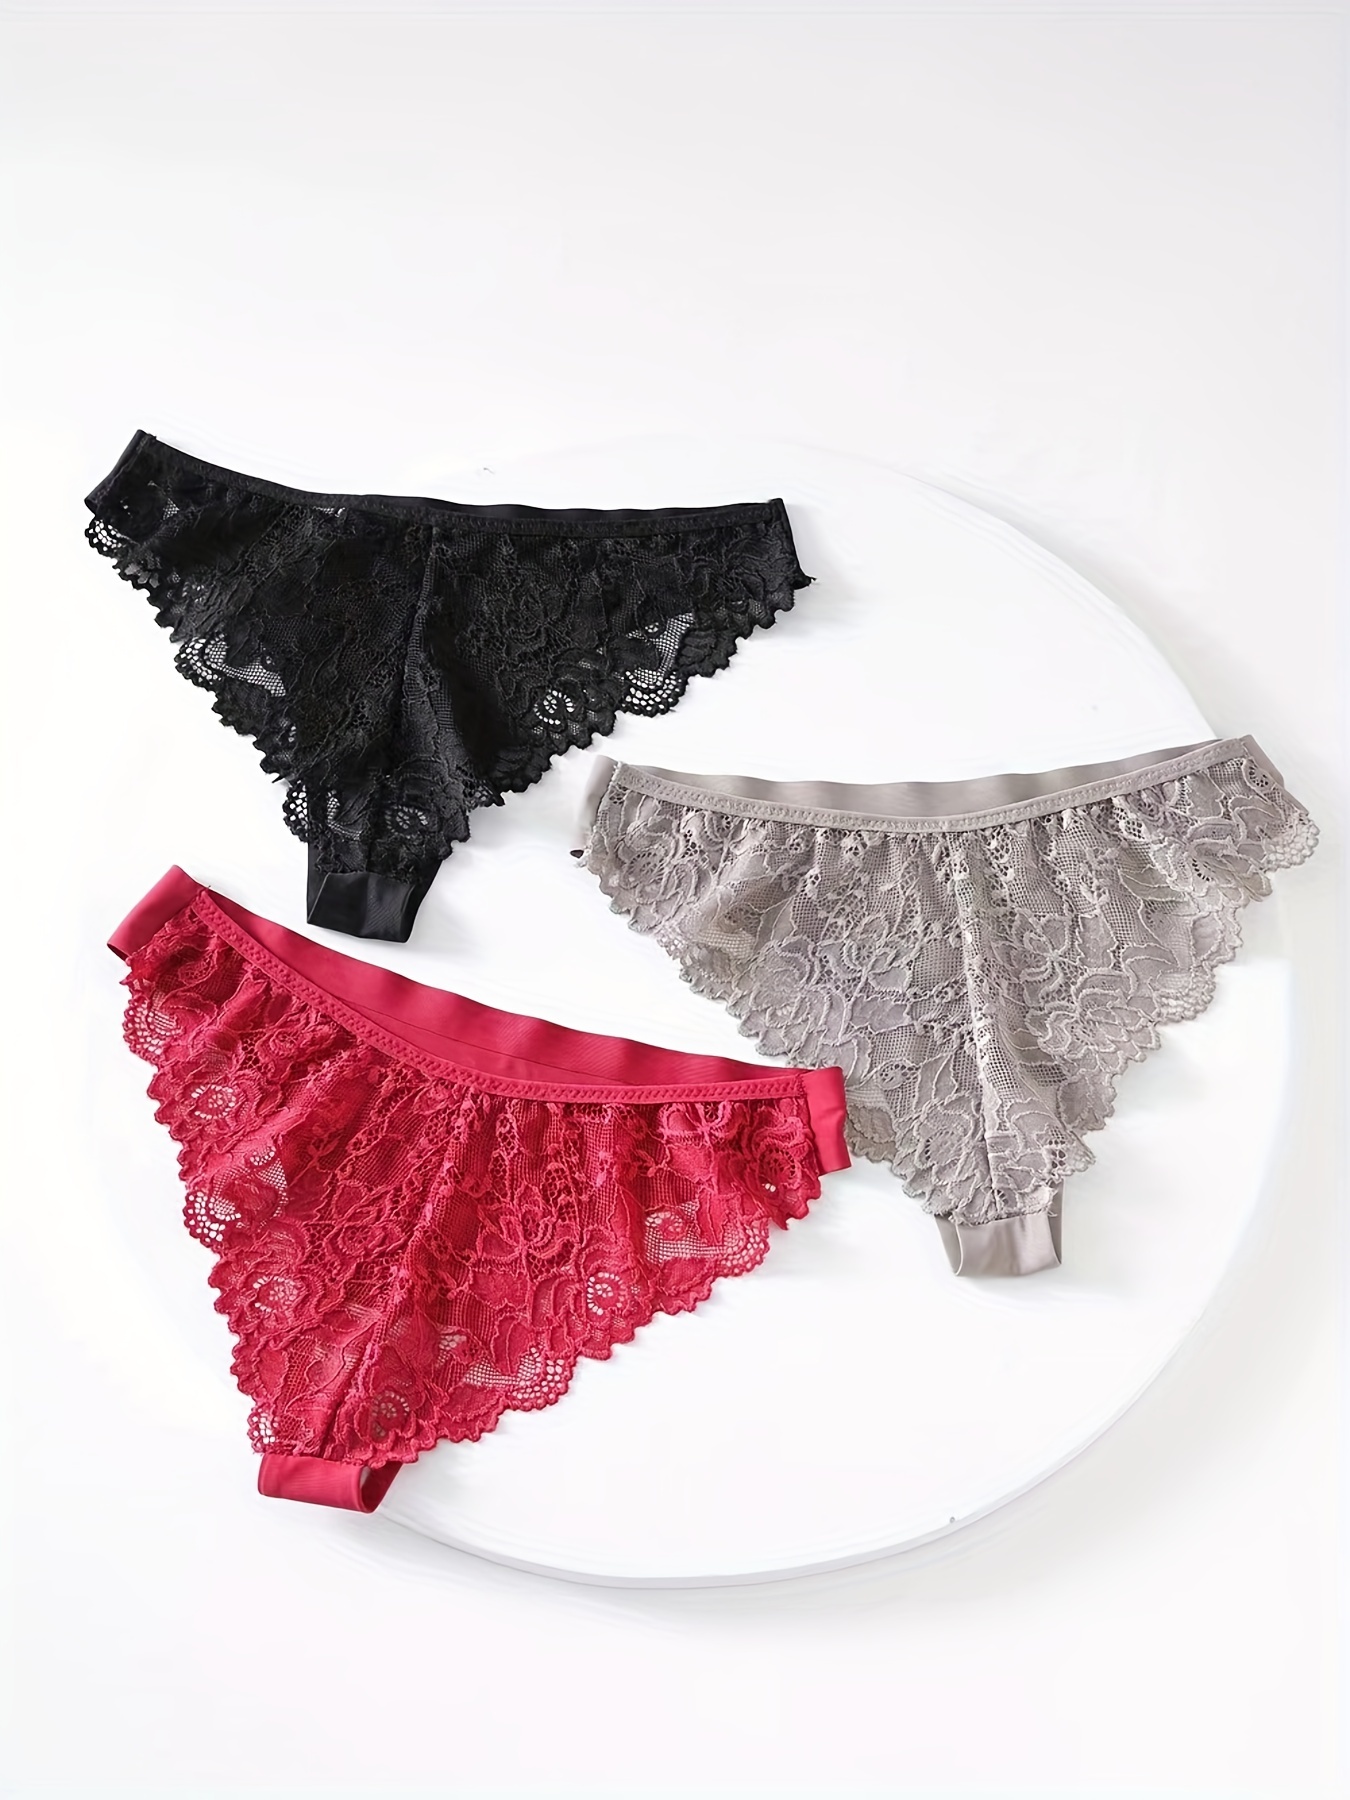 Womens No Show Panties High Waist Plus Size Cheeky Underwear for Women Sexy  Cotton Soft Thongs Invisibles Lace Solid, Black, Medium : :  Clothing, Shoes & Accessories